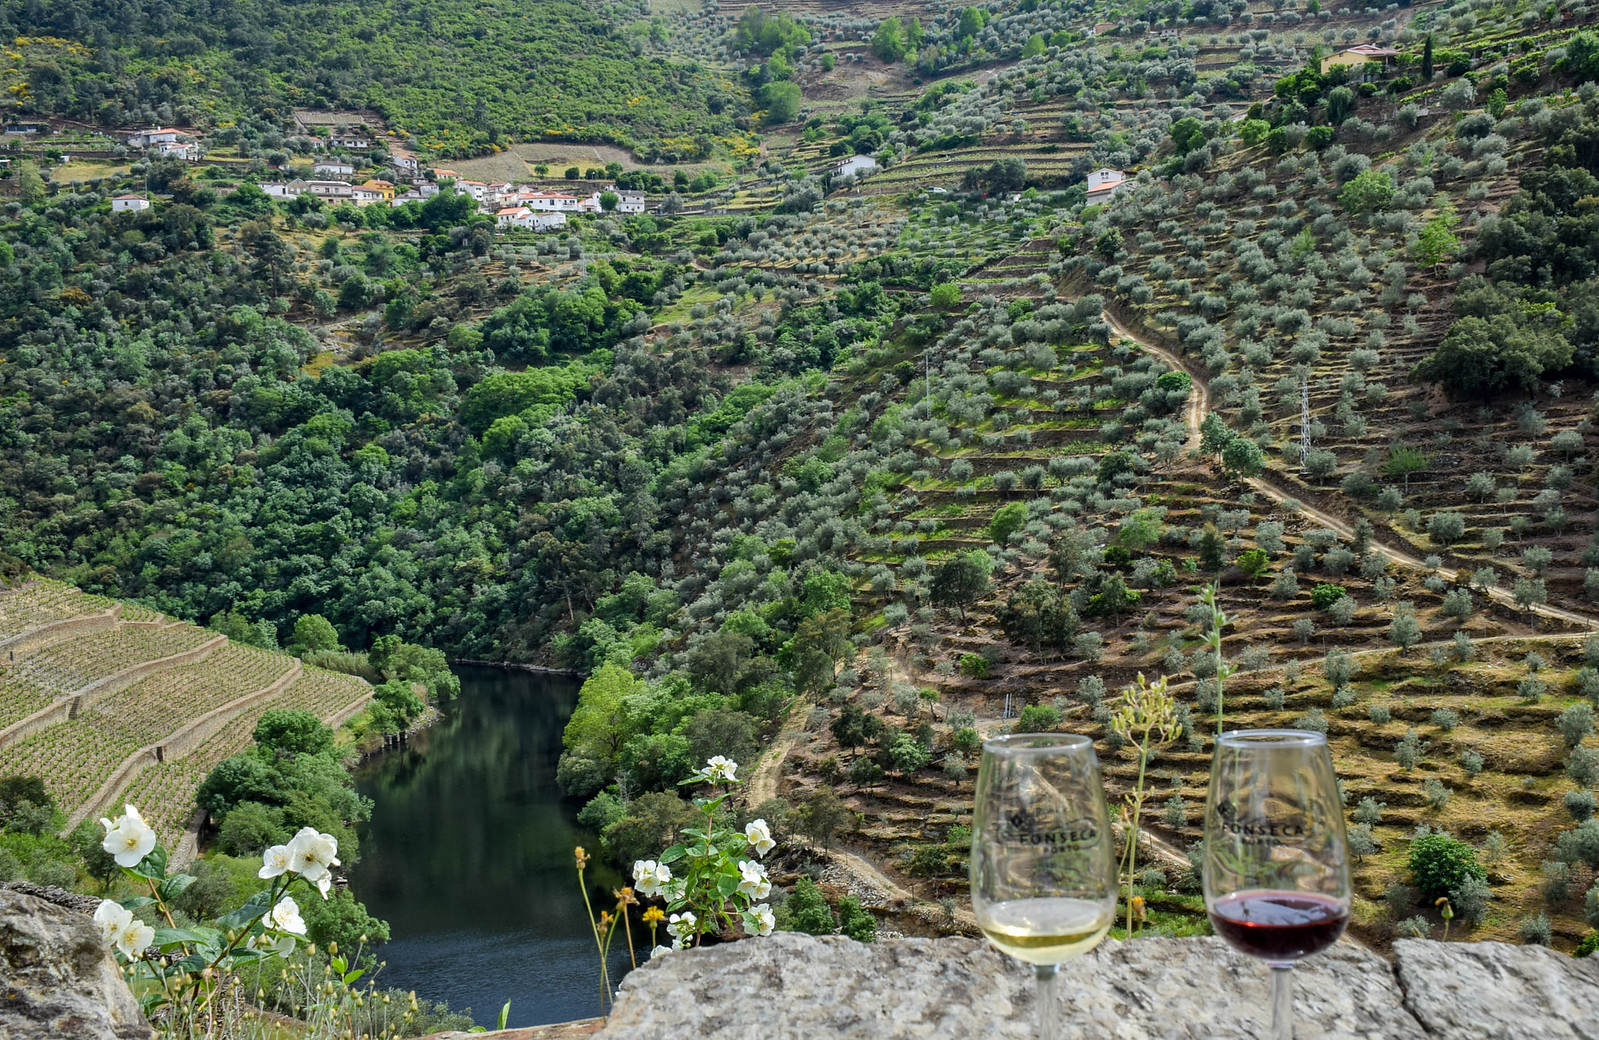 Best tour of the Douro Valley